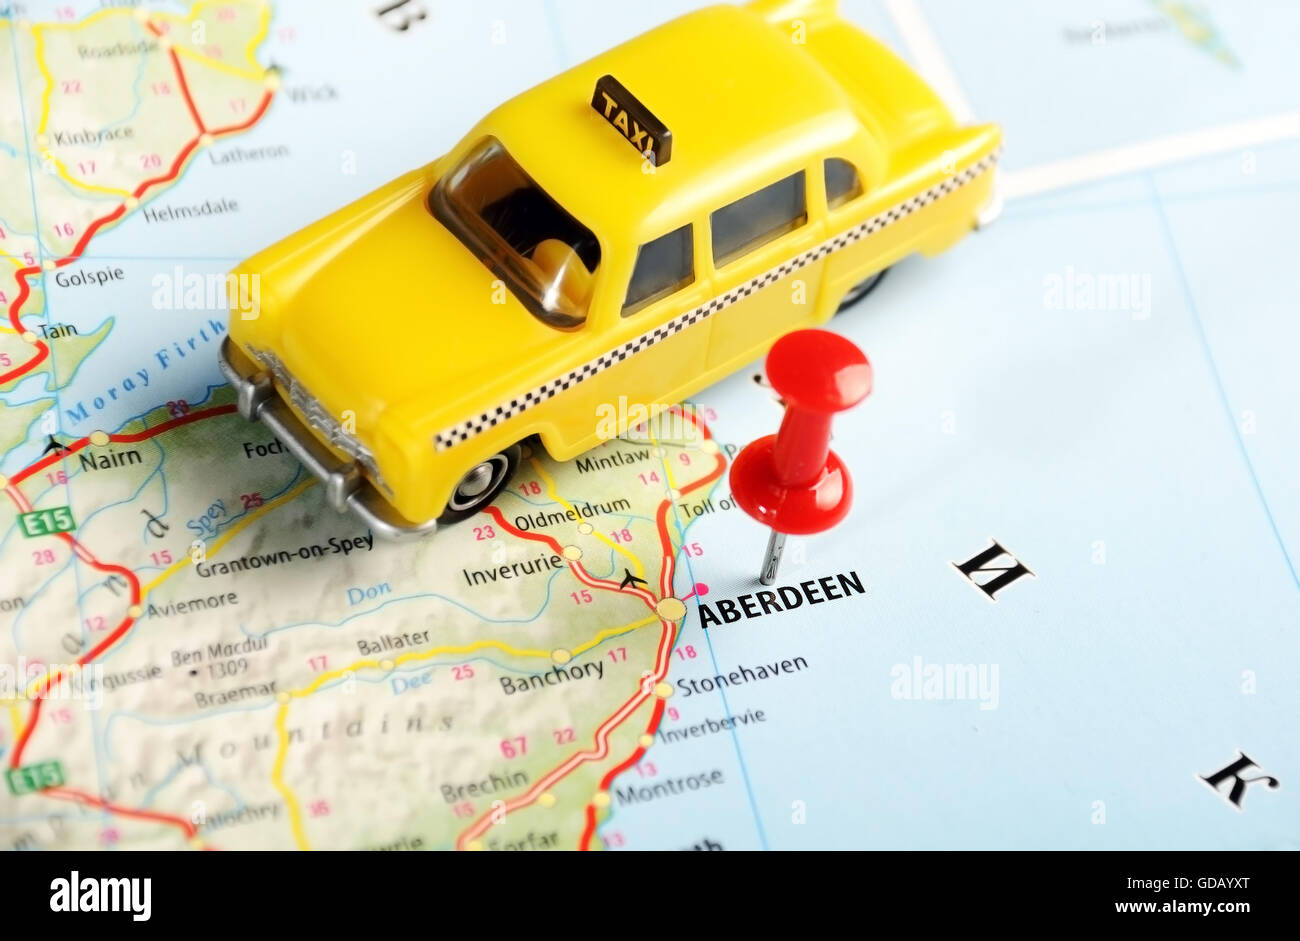 Aberdeen  Scotland  ,United Kingdom  map and  taxi car  - Travel concept Stock Photo